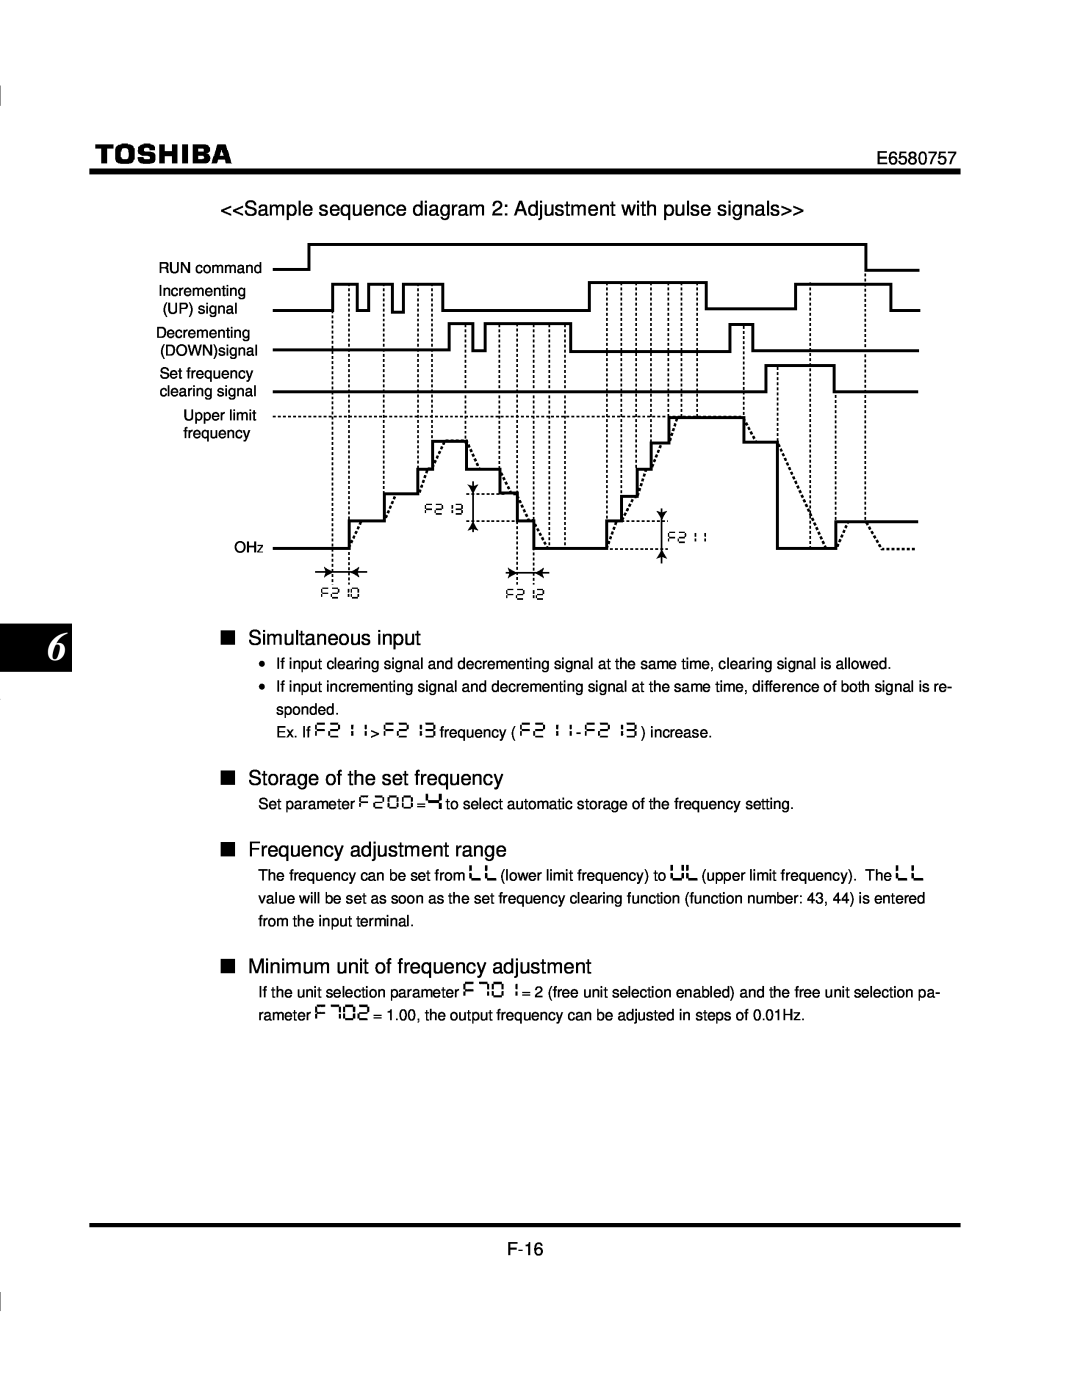 Toshiba VF-S9 Sample sequence diagram 2 Adjustment with pulse signals, Simultaneous input, Storage of the set frequency 